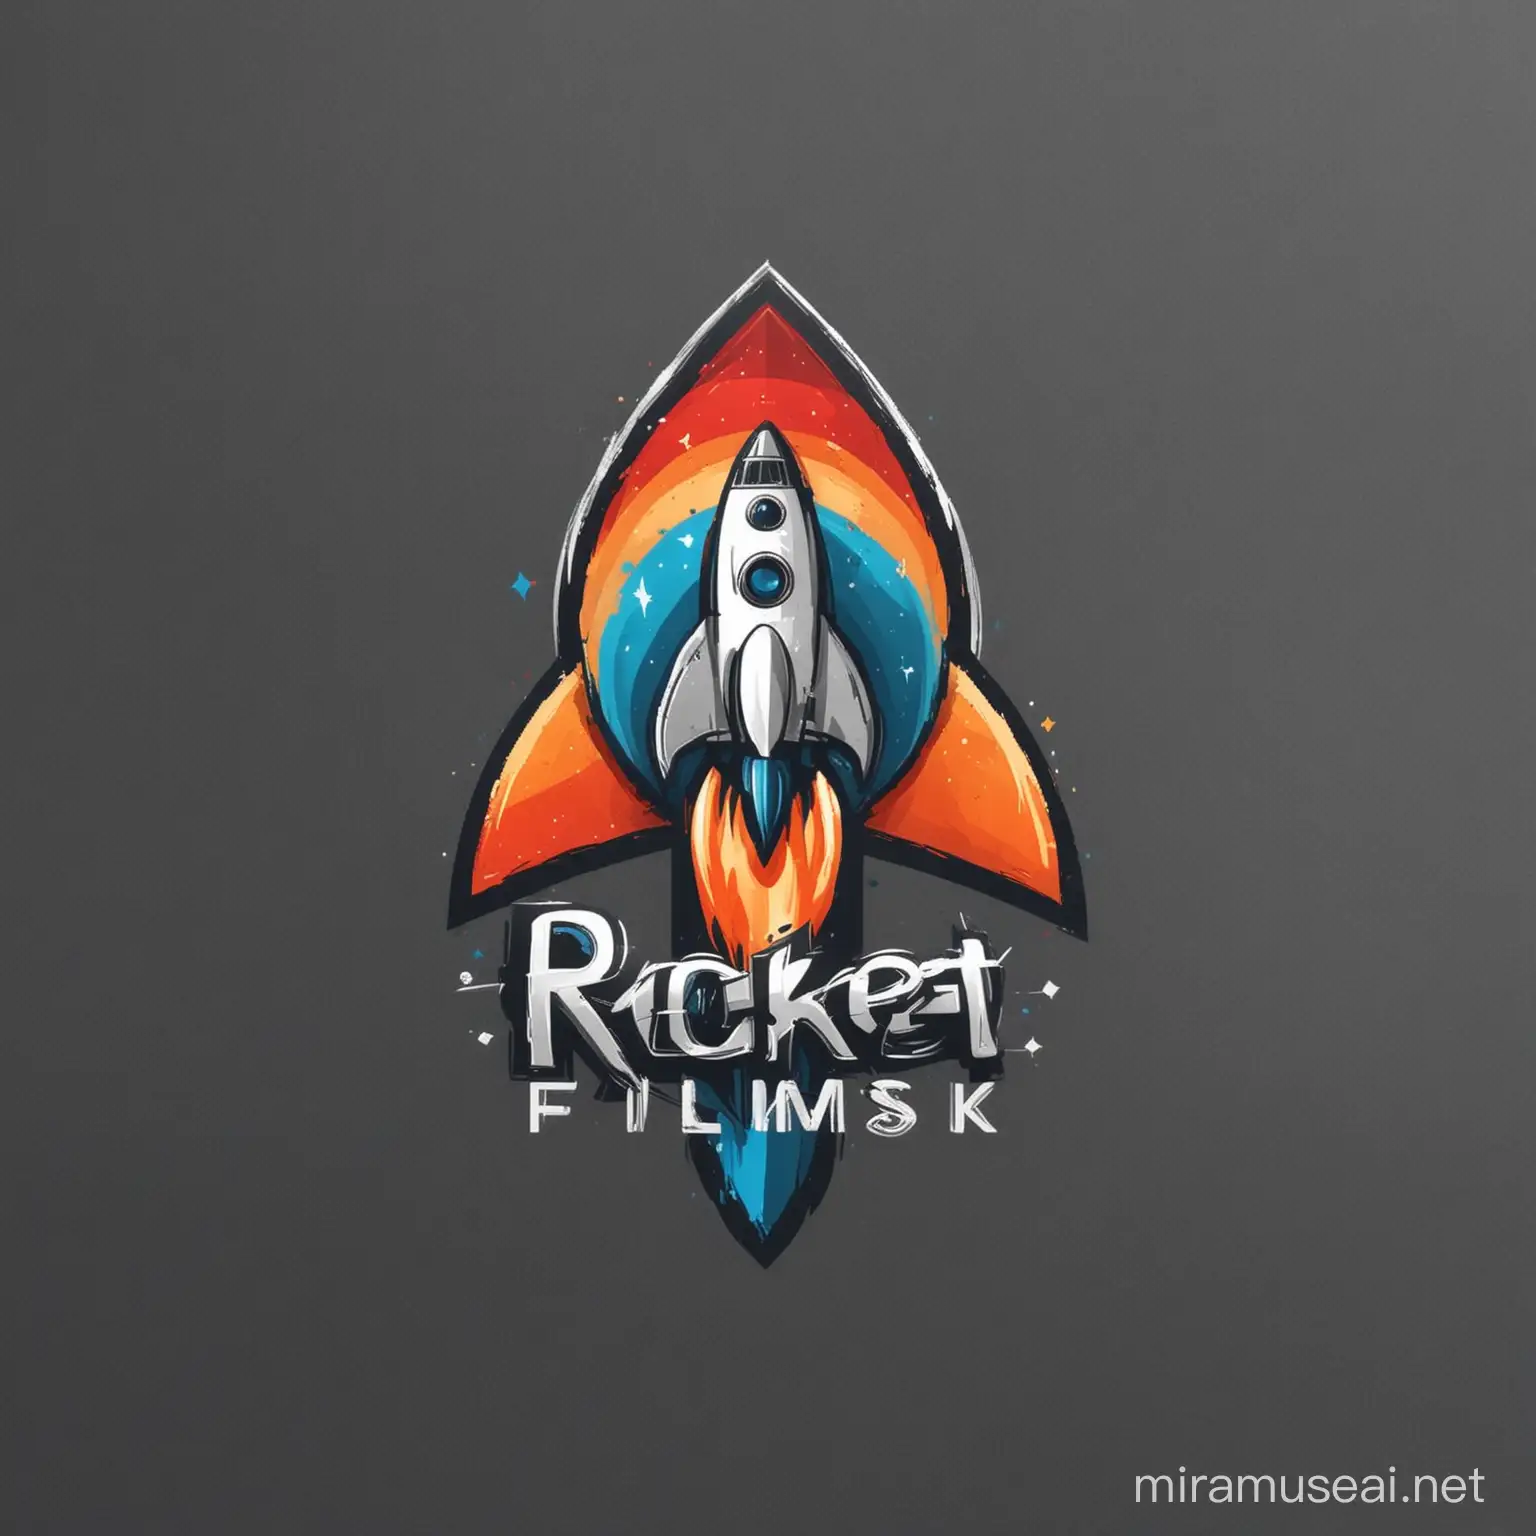 Create a classic and simple logo for a entertainment provider company named as "Rocket Flims & Network" and mentioned its name in the logo. 